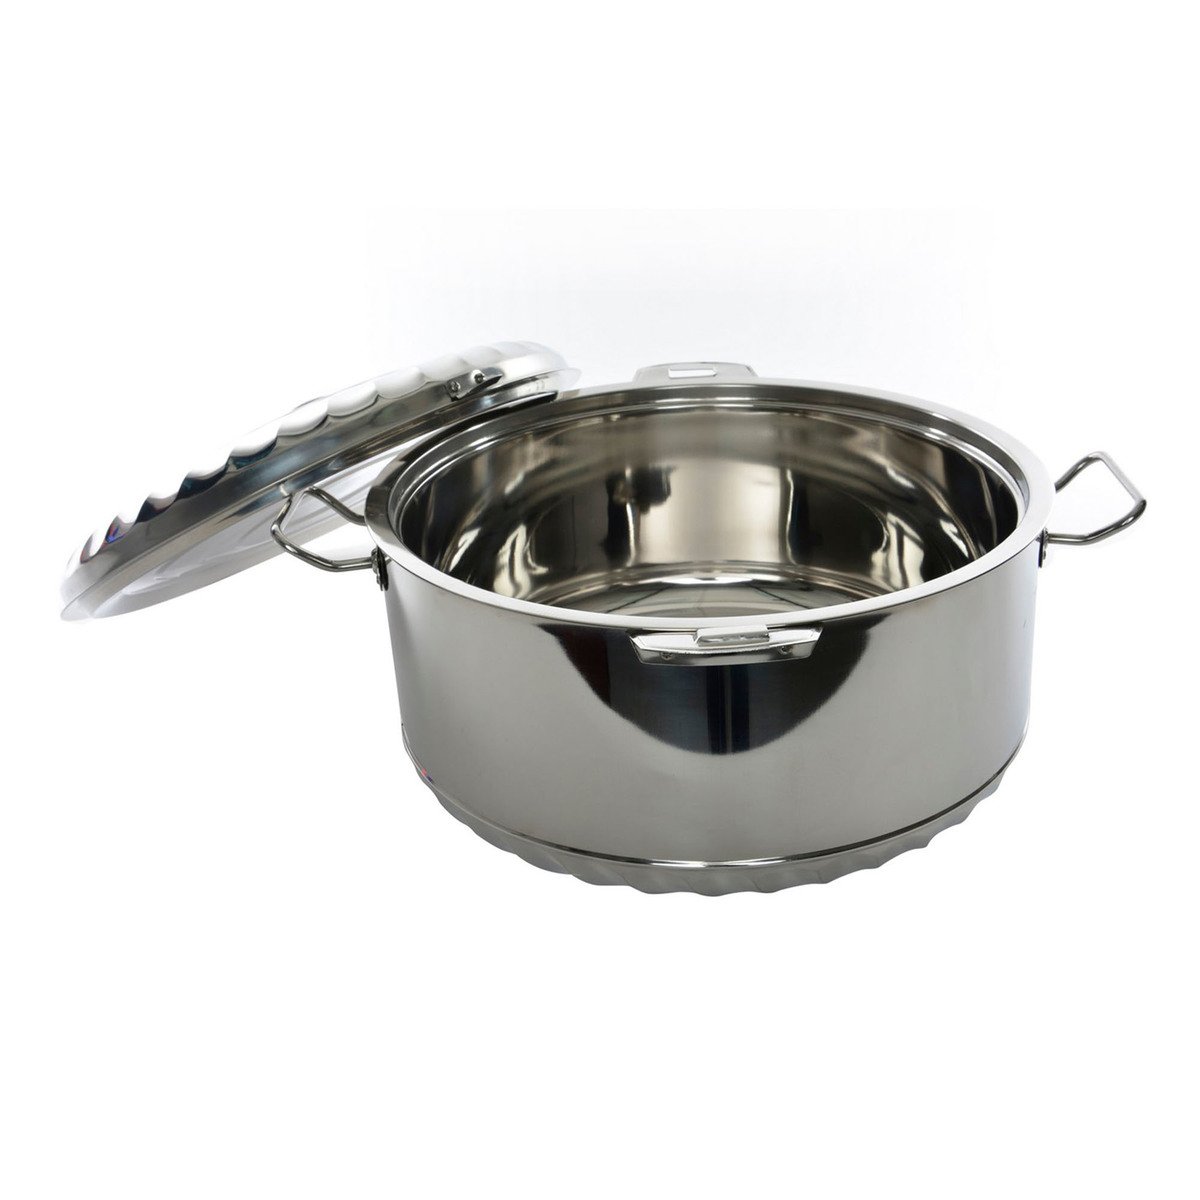 Chefline Stainless Steel Hot Pot SOLITAIRE 15Ltr